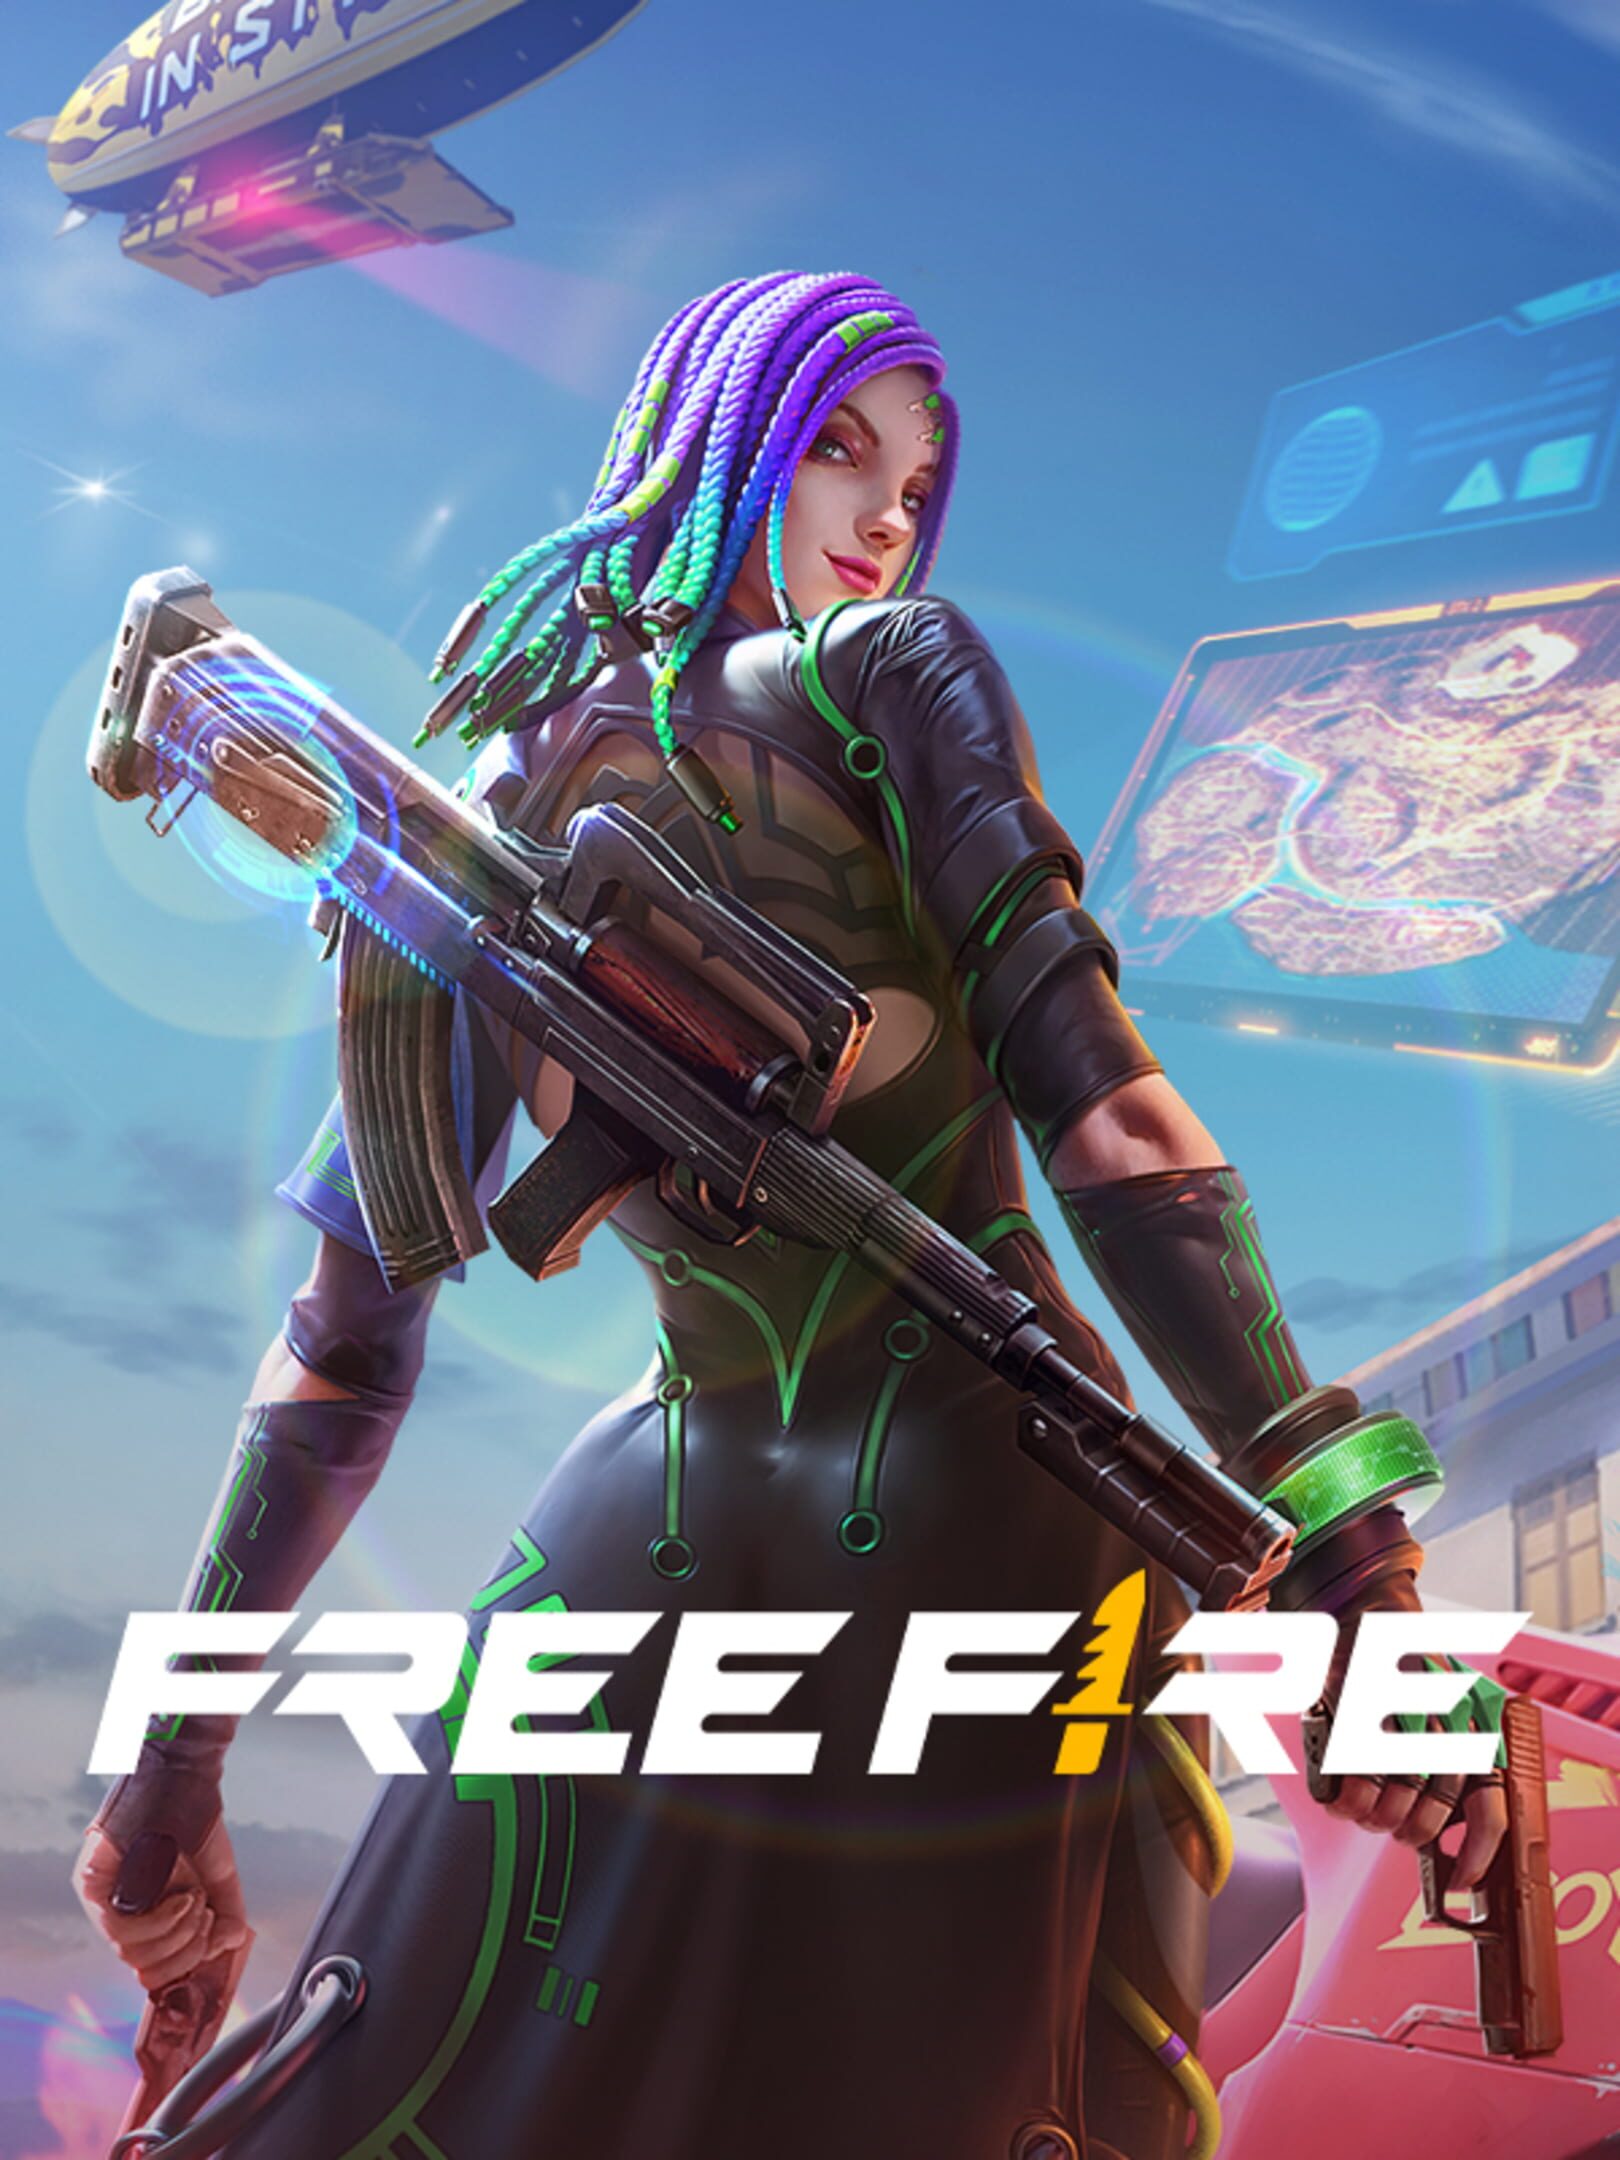 Garena Free Fire - Moco's done it again! 😱 Free Fire's best